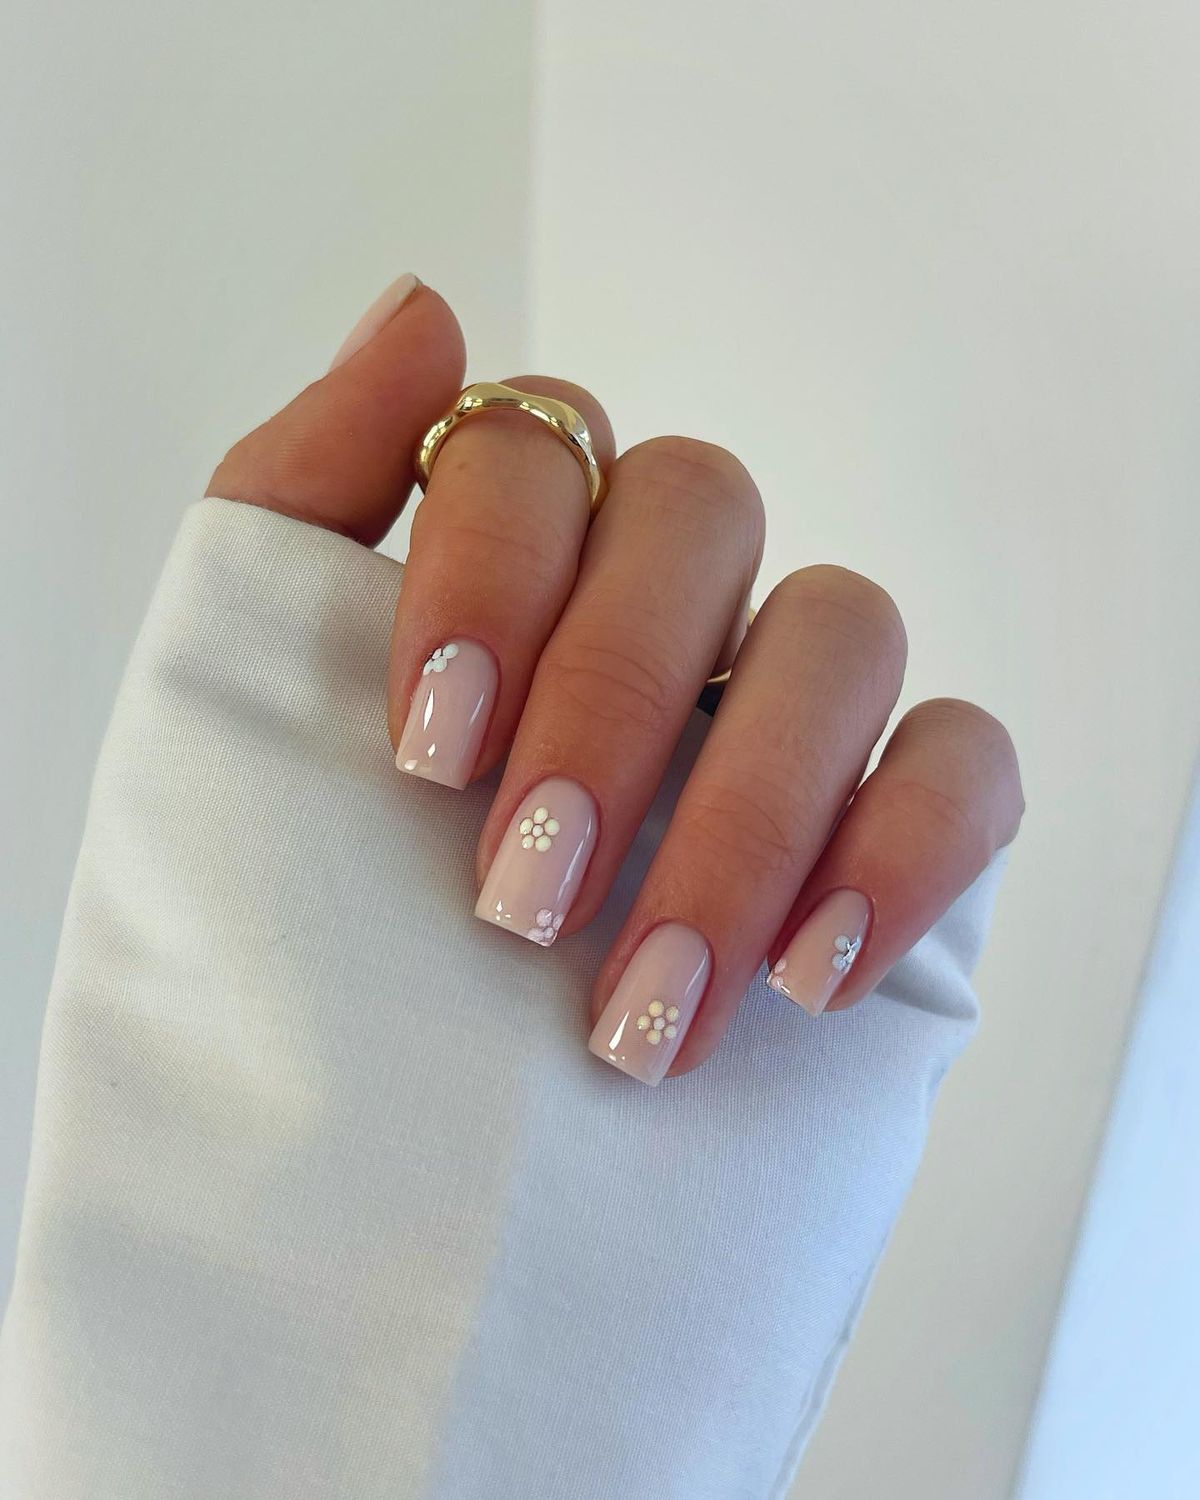 What counts as simple nail art?